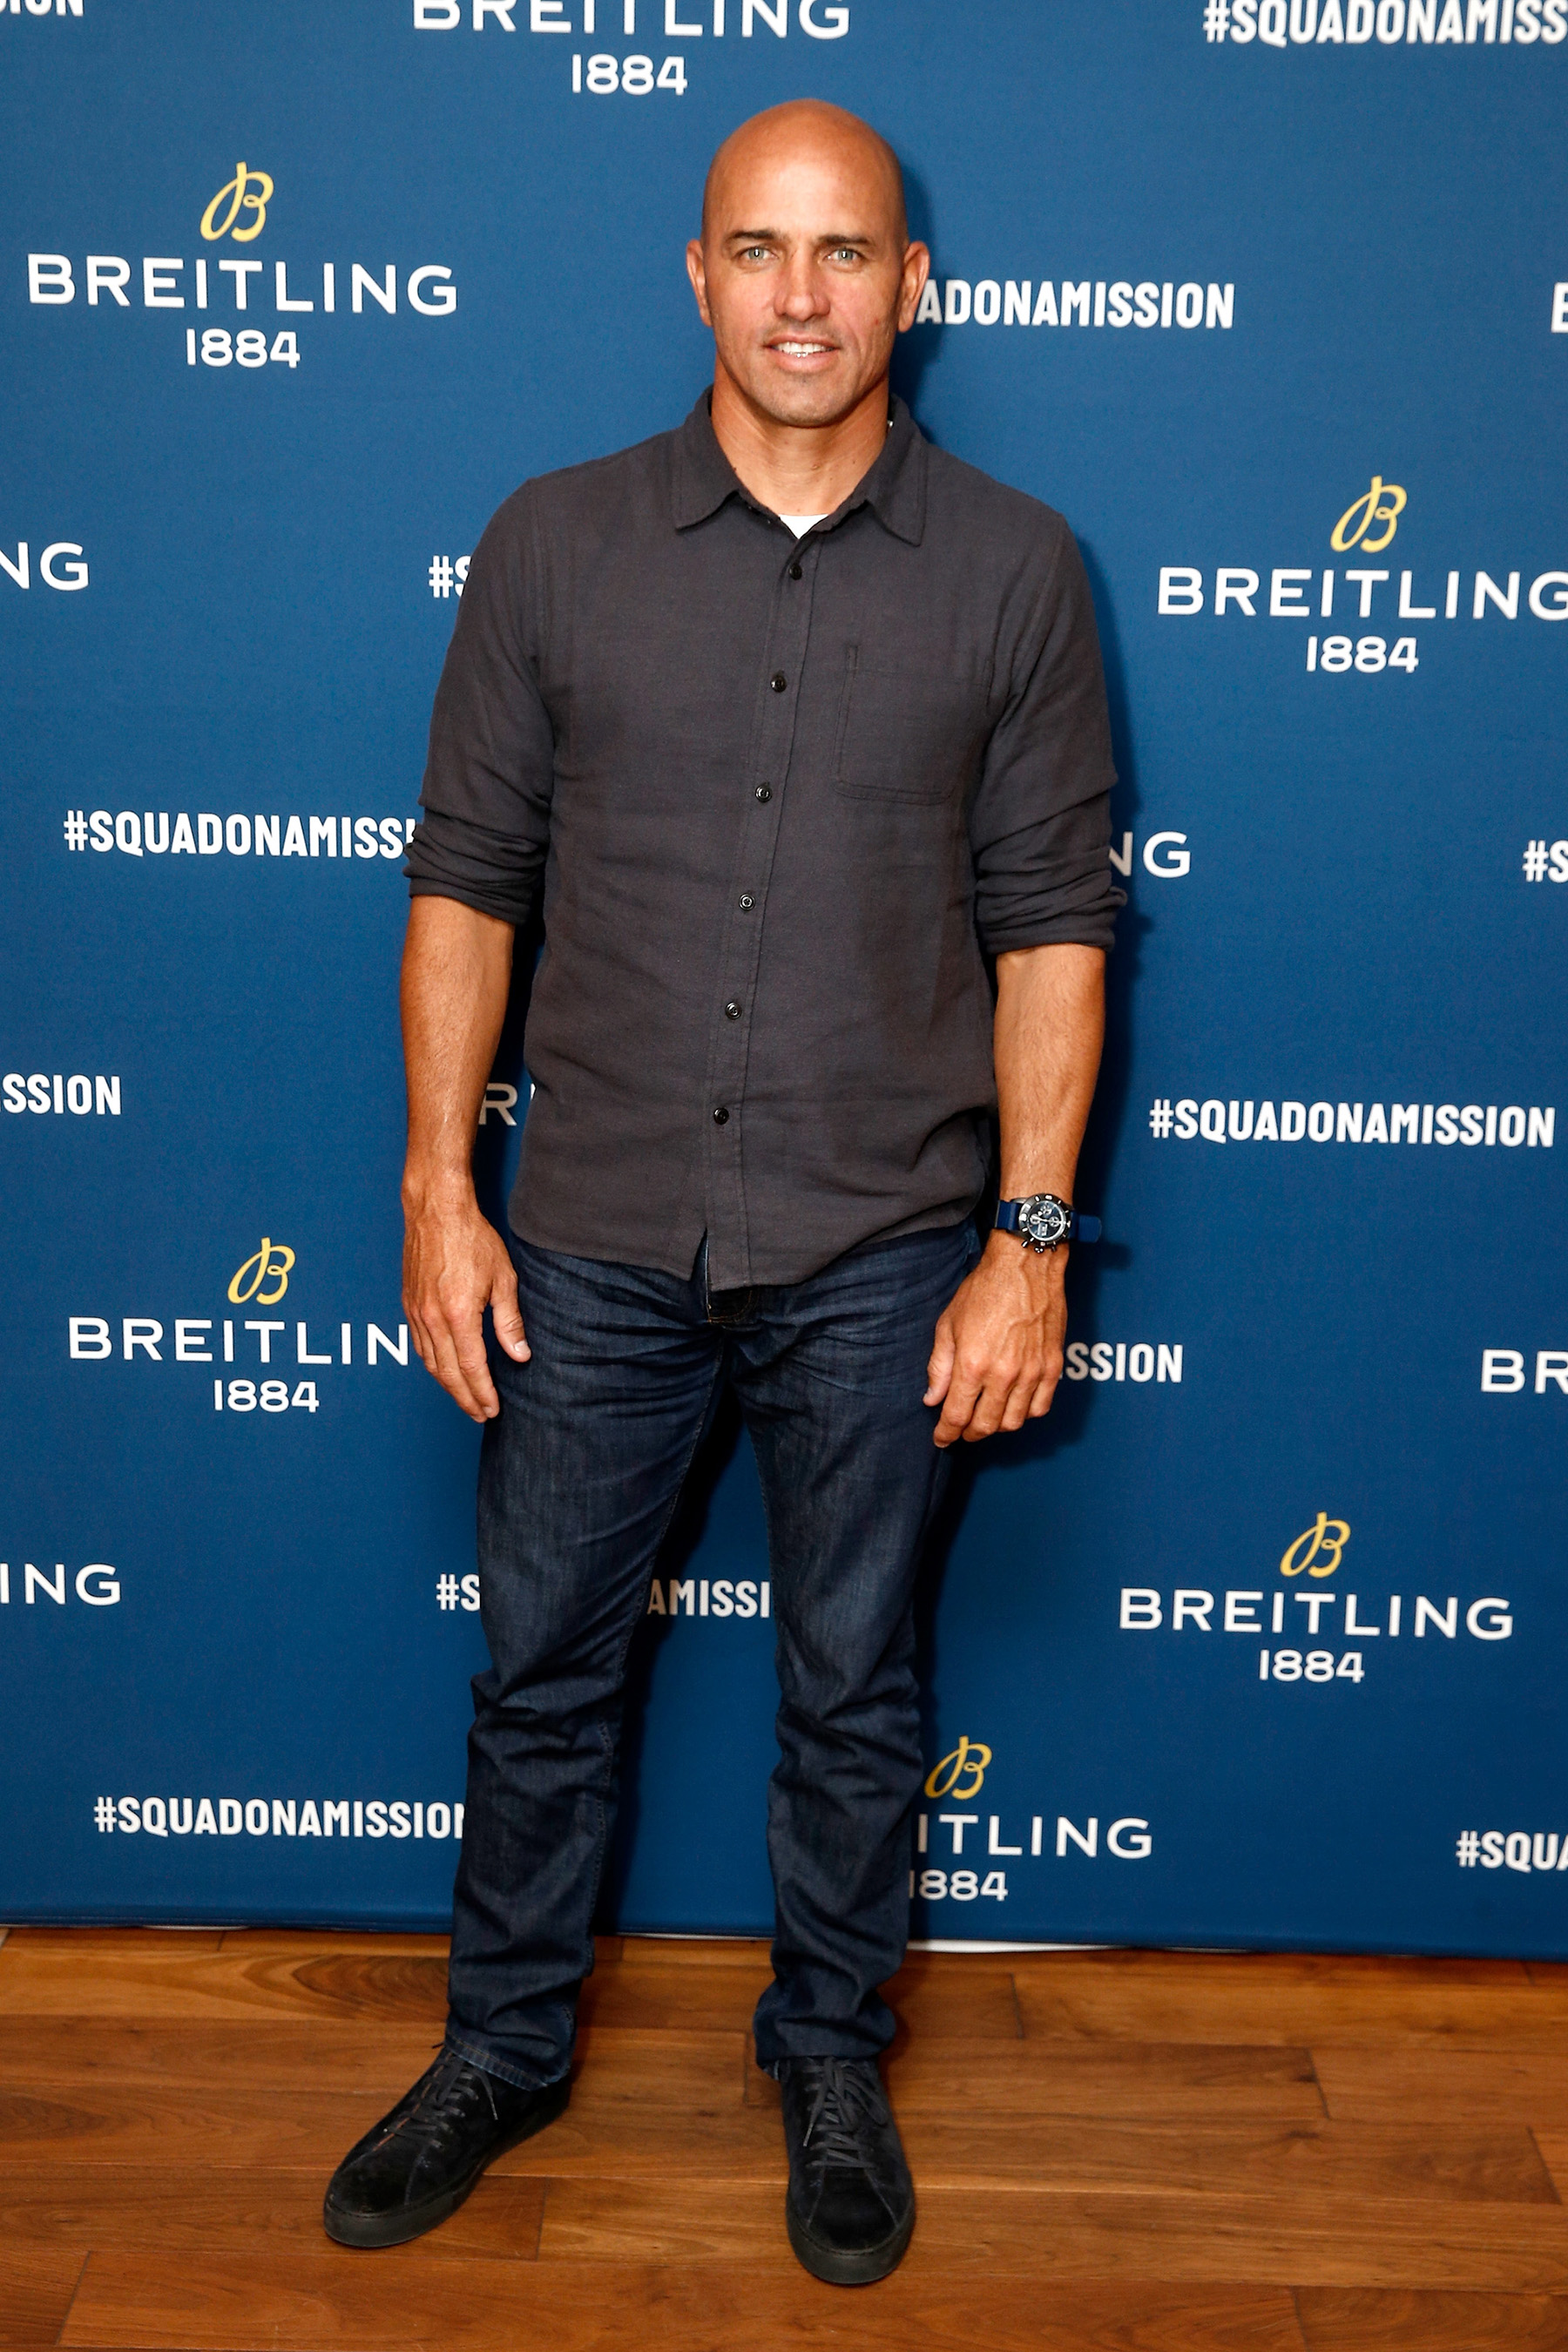 Breitling Unveils The Superocean Héritage II Chronograph 44 Outerknown Watch To The American Market With Kelly Slater At Breitling Boutique New York